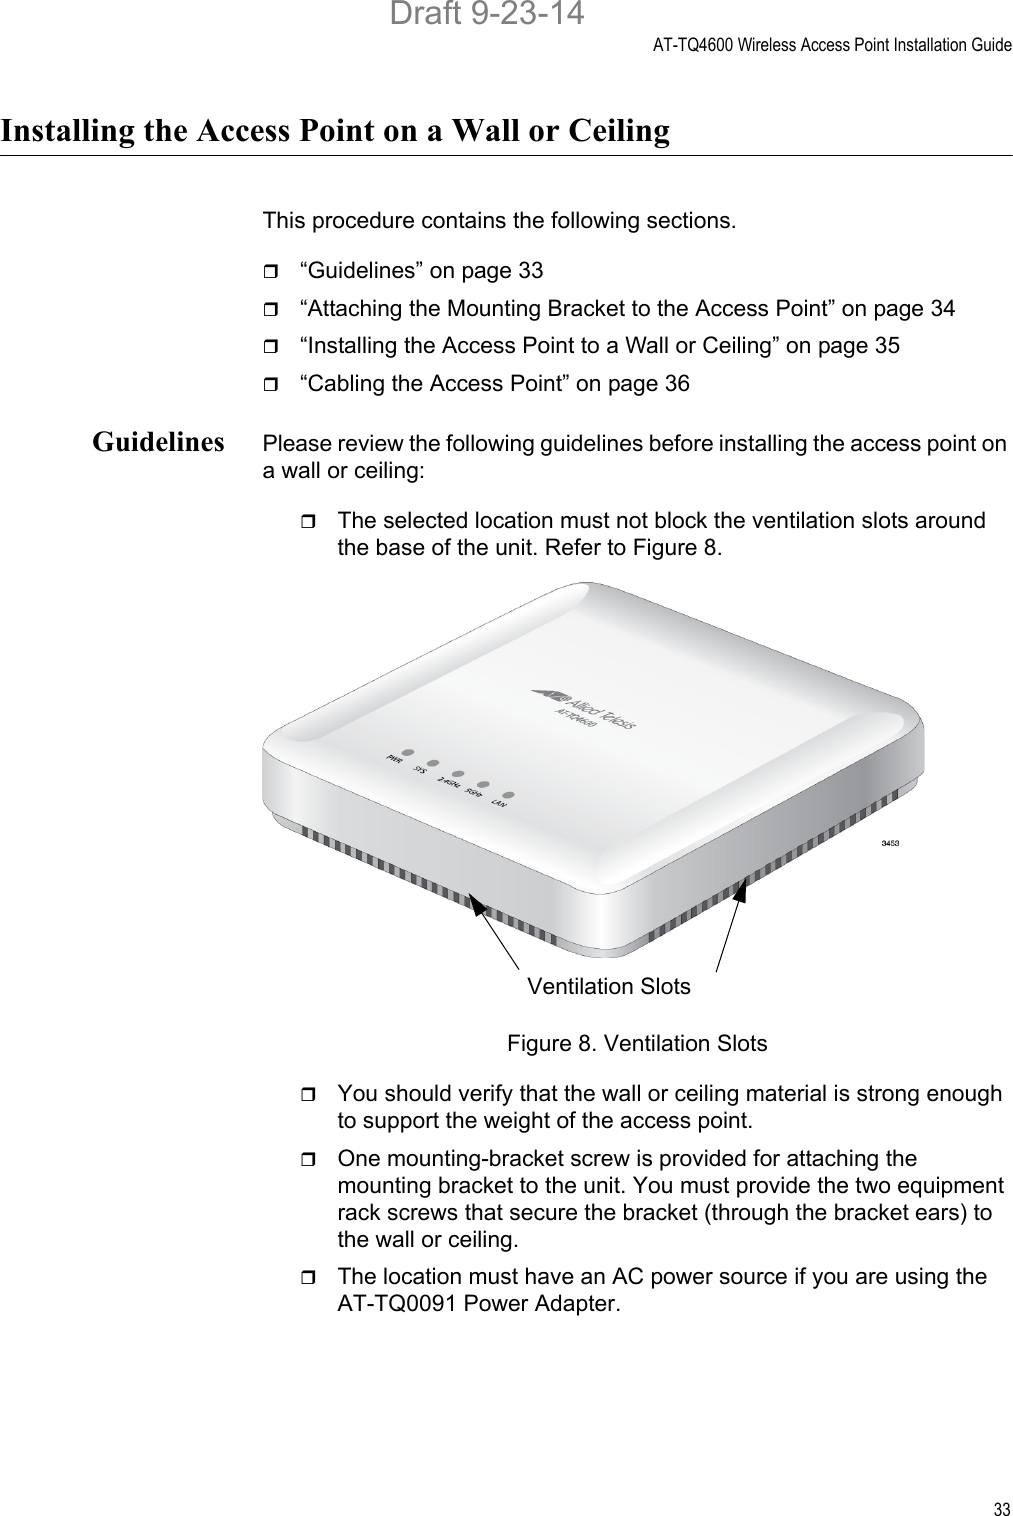 AT-TQ4600 Wireless Access Point Installation Guide33Installing the Access Point on a Wall or CeilingThis procedure contains the following sections.“Guidelines” on page 33“Attaching the Mounting Bracket to the Access Point” on page 34“Installing the Access Point to a Wall or Ceiling” on page 35“Cabling the Access Point” on page 36Guidelines Please review the following guidelines before installing the access point on a wall or ceiling:The selected location must not block the ventilation slots around the base of the unit. Refer to Figure 8.Figure 8. Ventilation SlotsYou should verify that the wall or ceiling material is strong enough to support the weight of the access point.One mounting-bracket screw is provided for attaching the mounting bracket to the unit. You must provide the two equipment rack screws that secure the bracket (through the bracket ears) to the wall or ceiling.The location must have an AC power source if you are using the AT-TQ0091 Power Adapter.Ventilation SlotsDraft 9-23-14